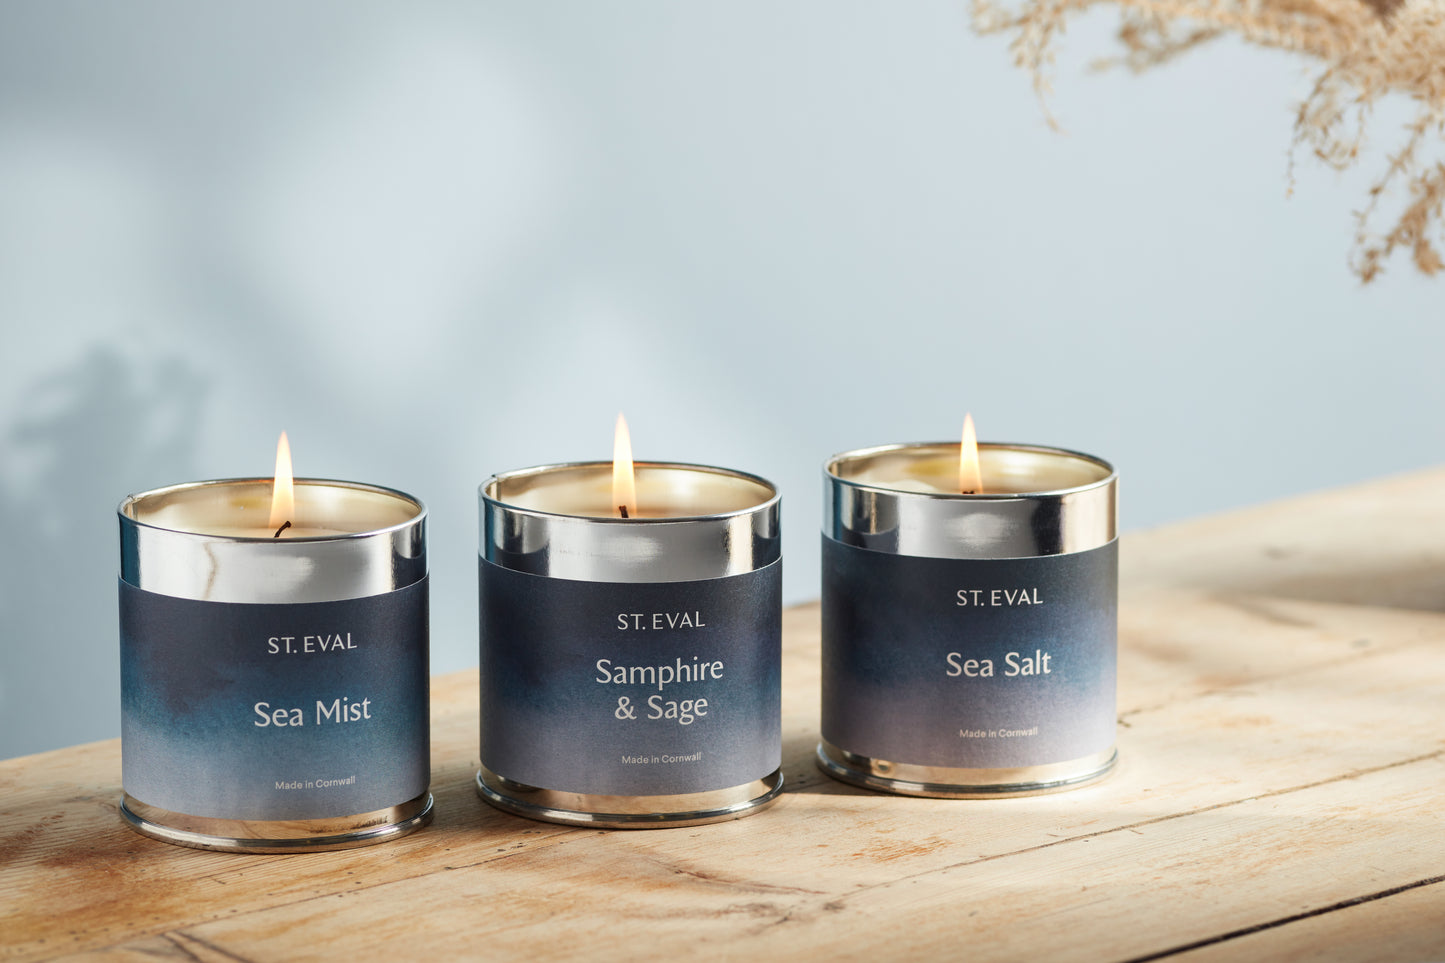 St Eval Samphire & Sage Scented Tin Candle